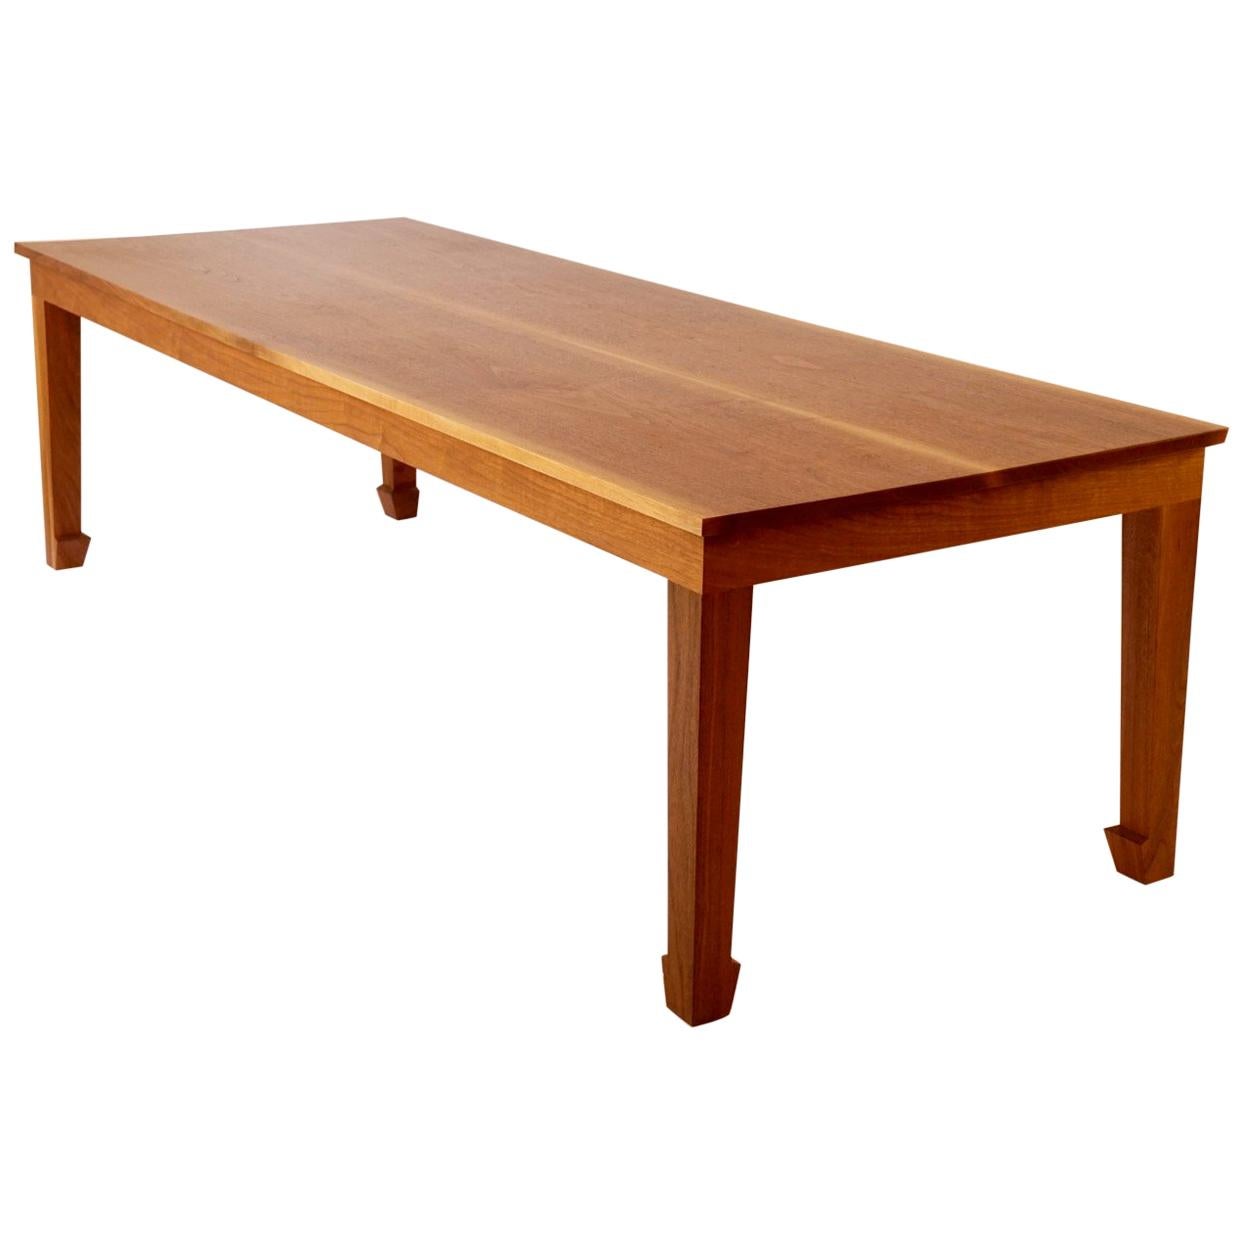 What is the most durable table top?